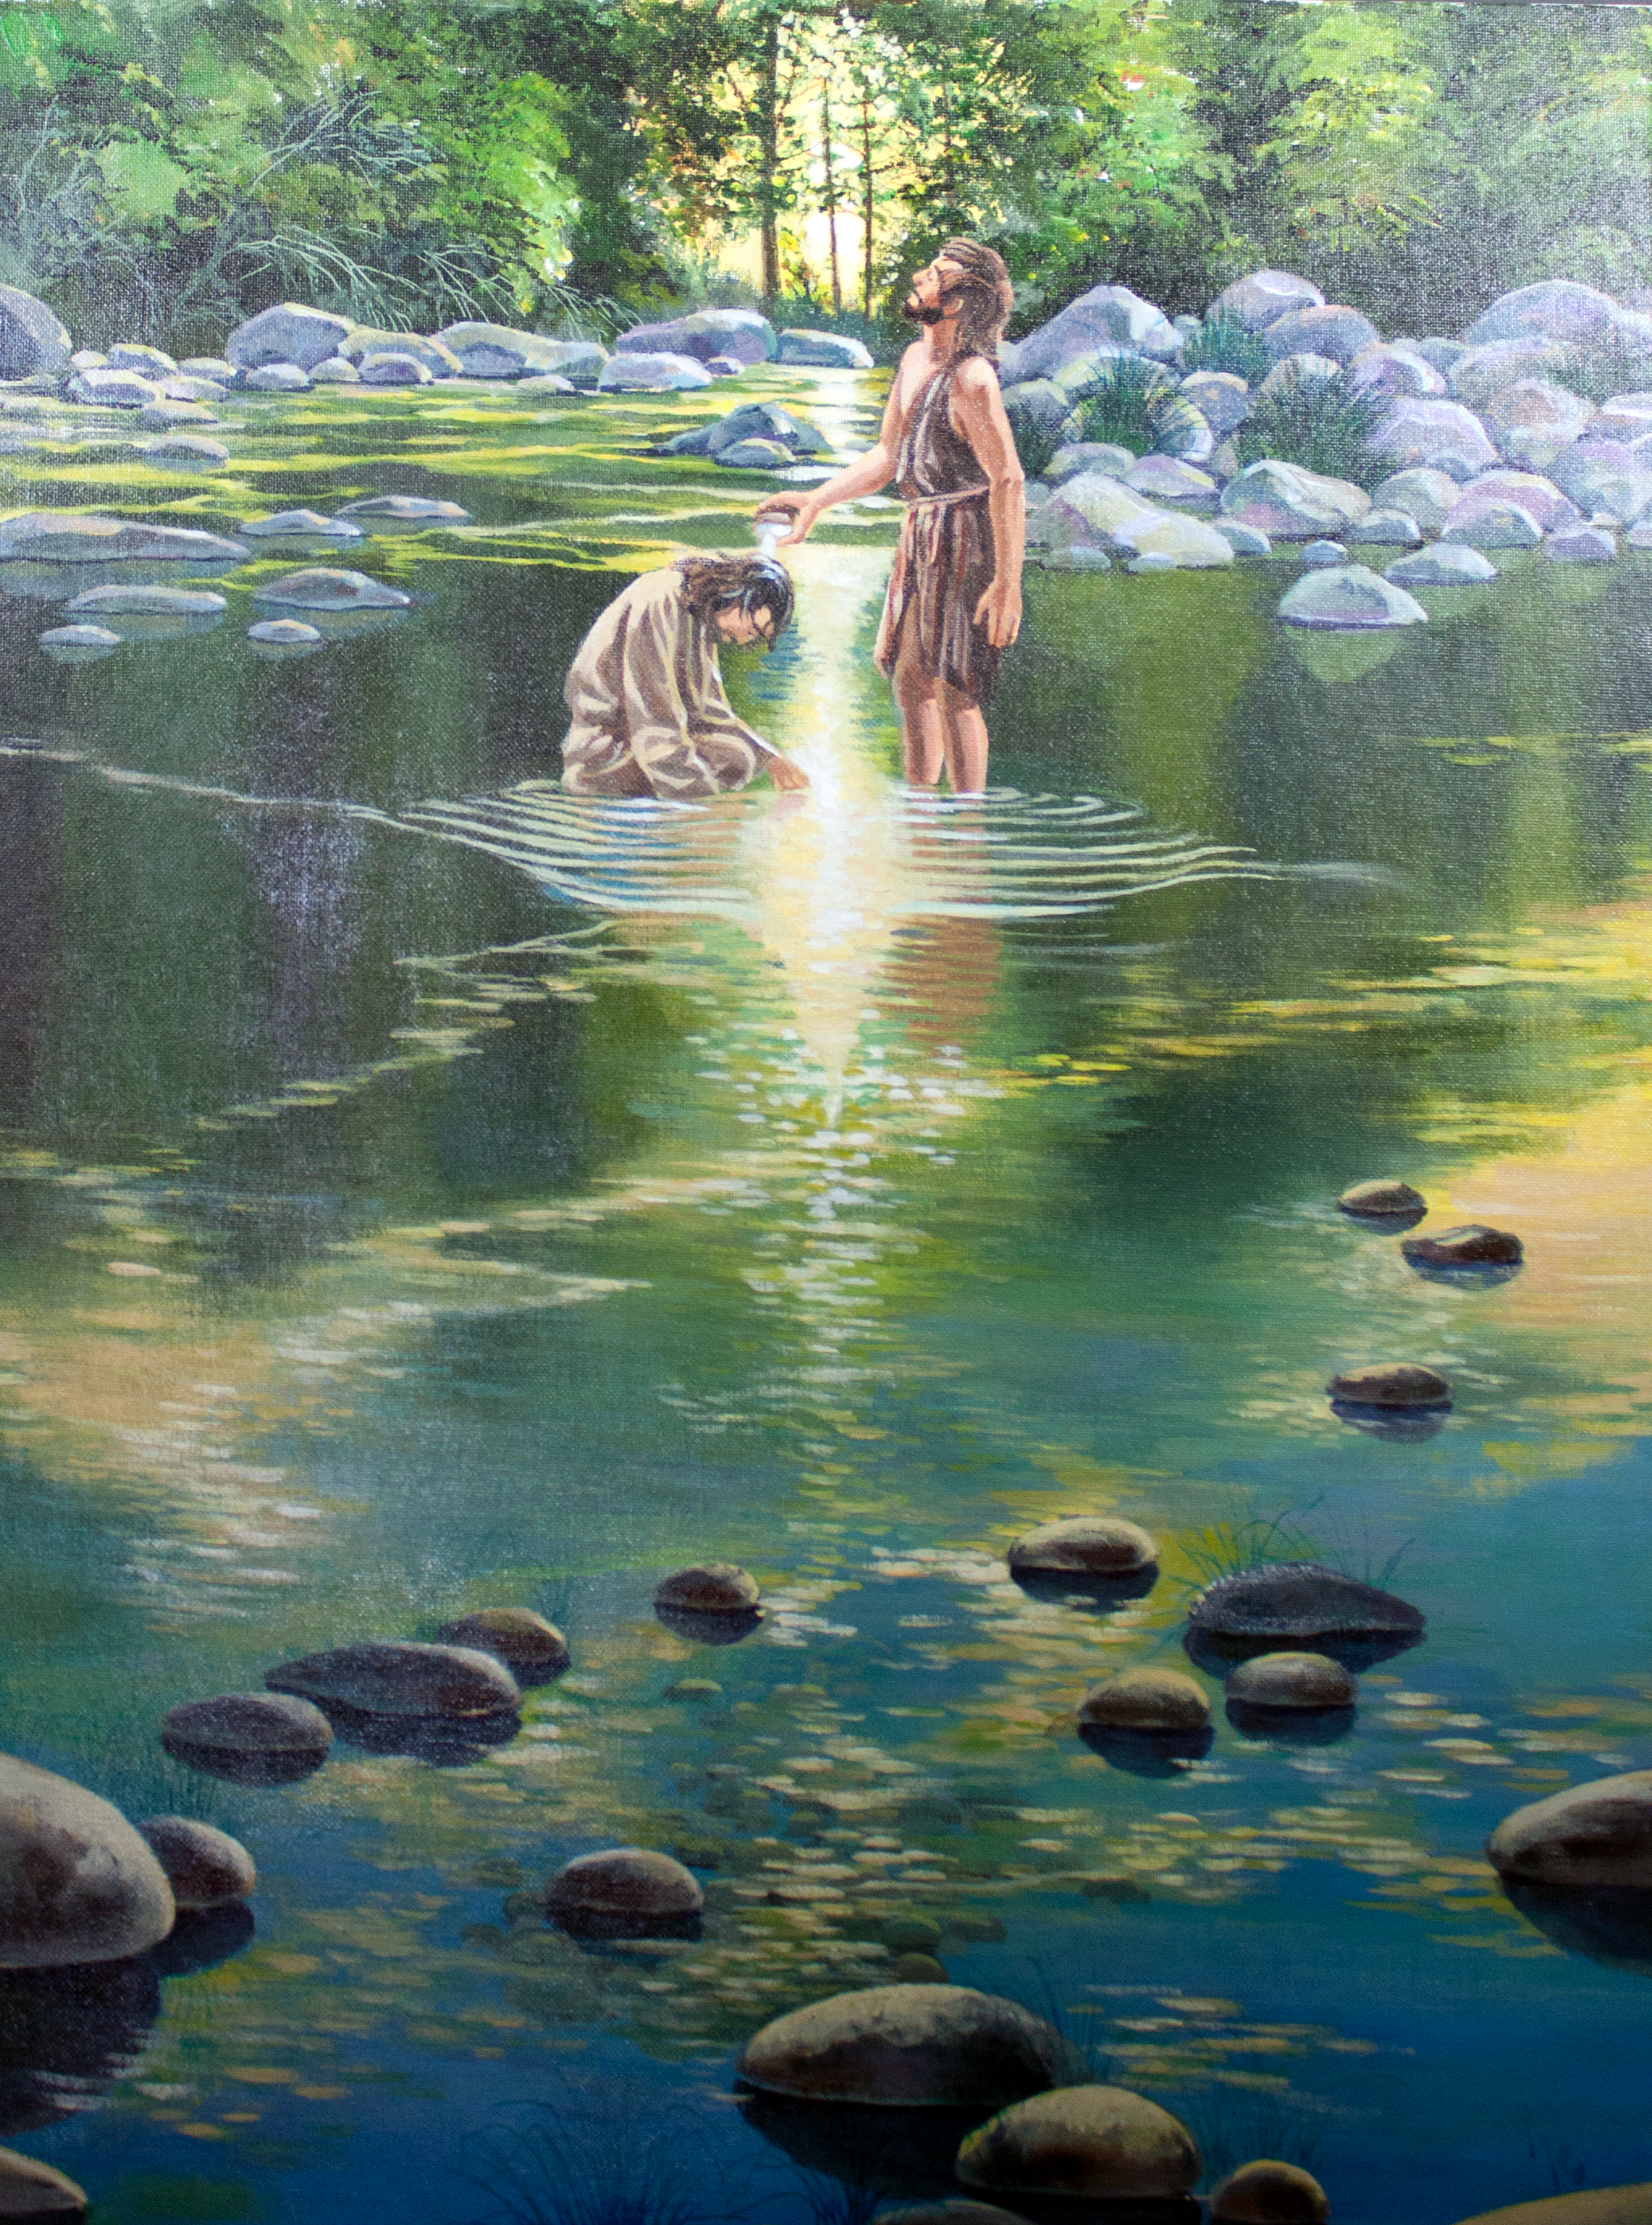 Spirit's Image  Jesus comes to the Jordan River to be baptized by John. John protests that he should be baptized by Christ, but concedes to baptize the Savior through the prompting of the Holy Spirit. In the course of the baptism, a dove appears and precedes the Father's declaration that He is well pleased with His son. The dove's image is present in the ripples of the water around the figures of John and Jesus.